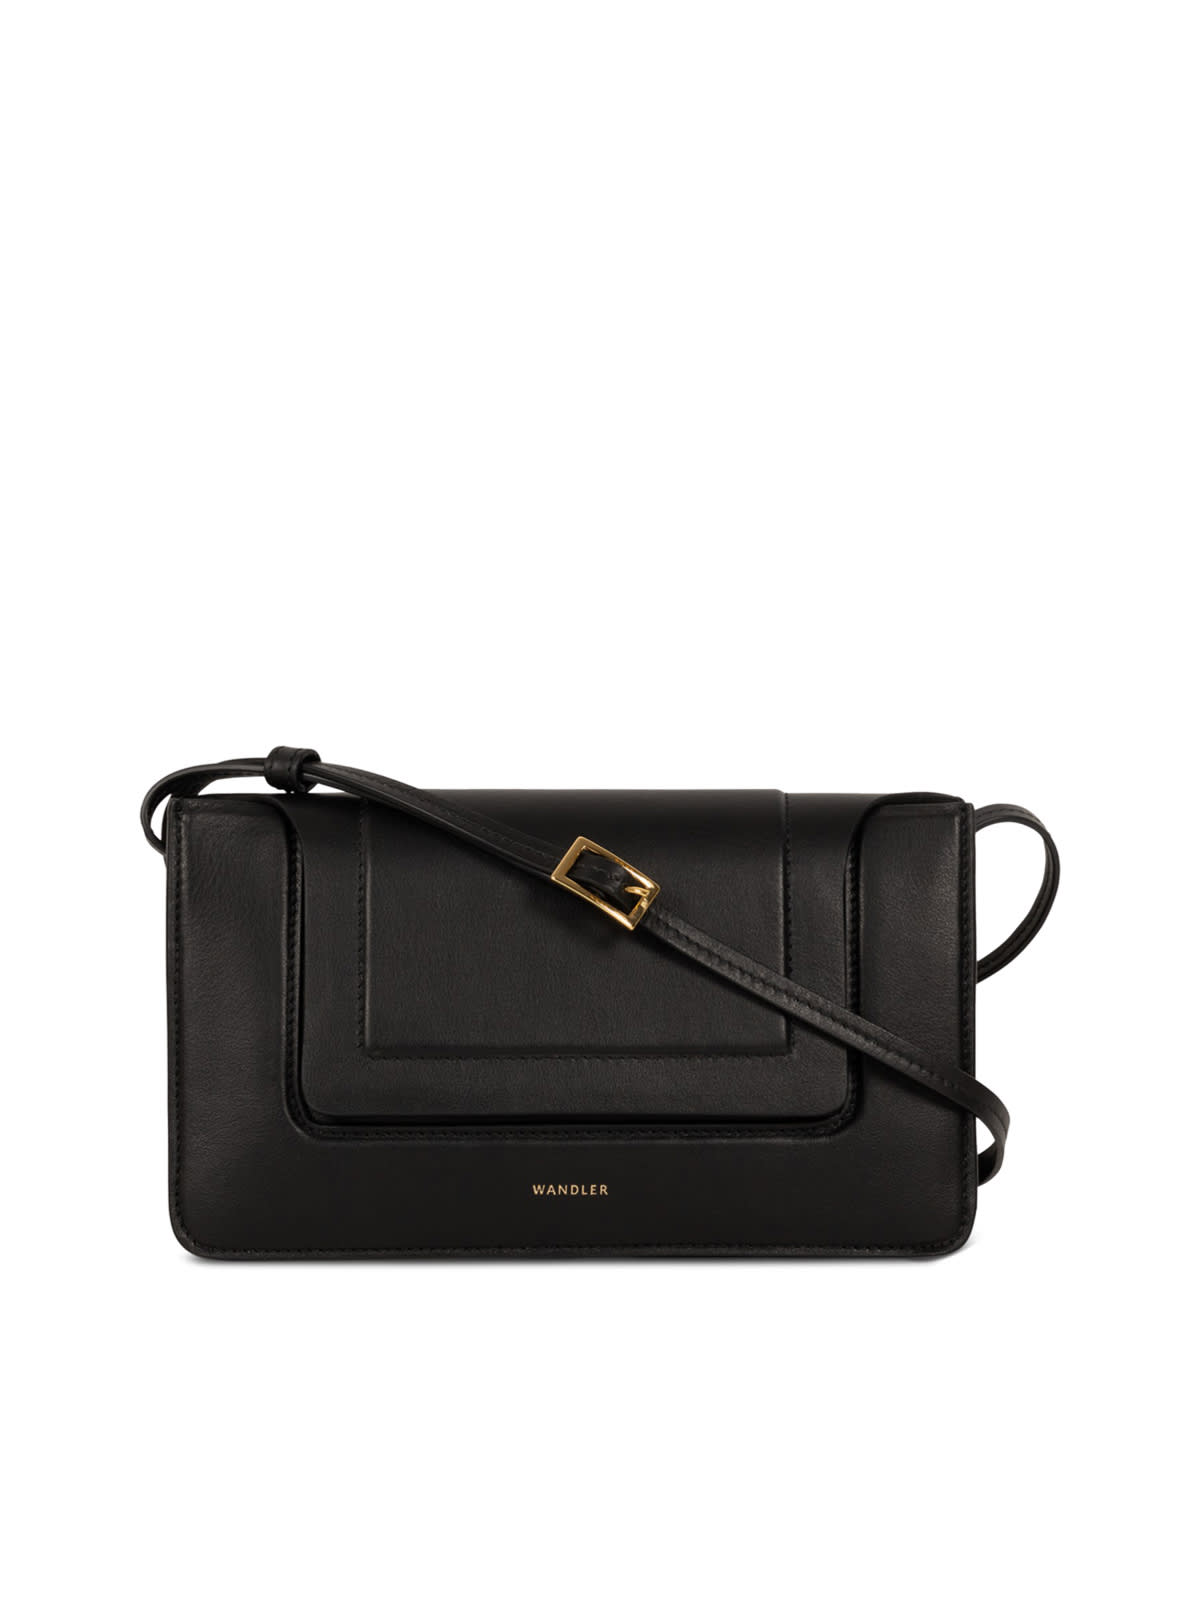 Women's WANDLER Bags On Sale, Up To 70% Off | ModeSens